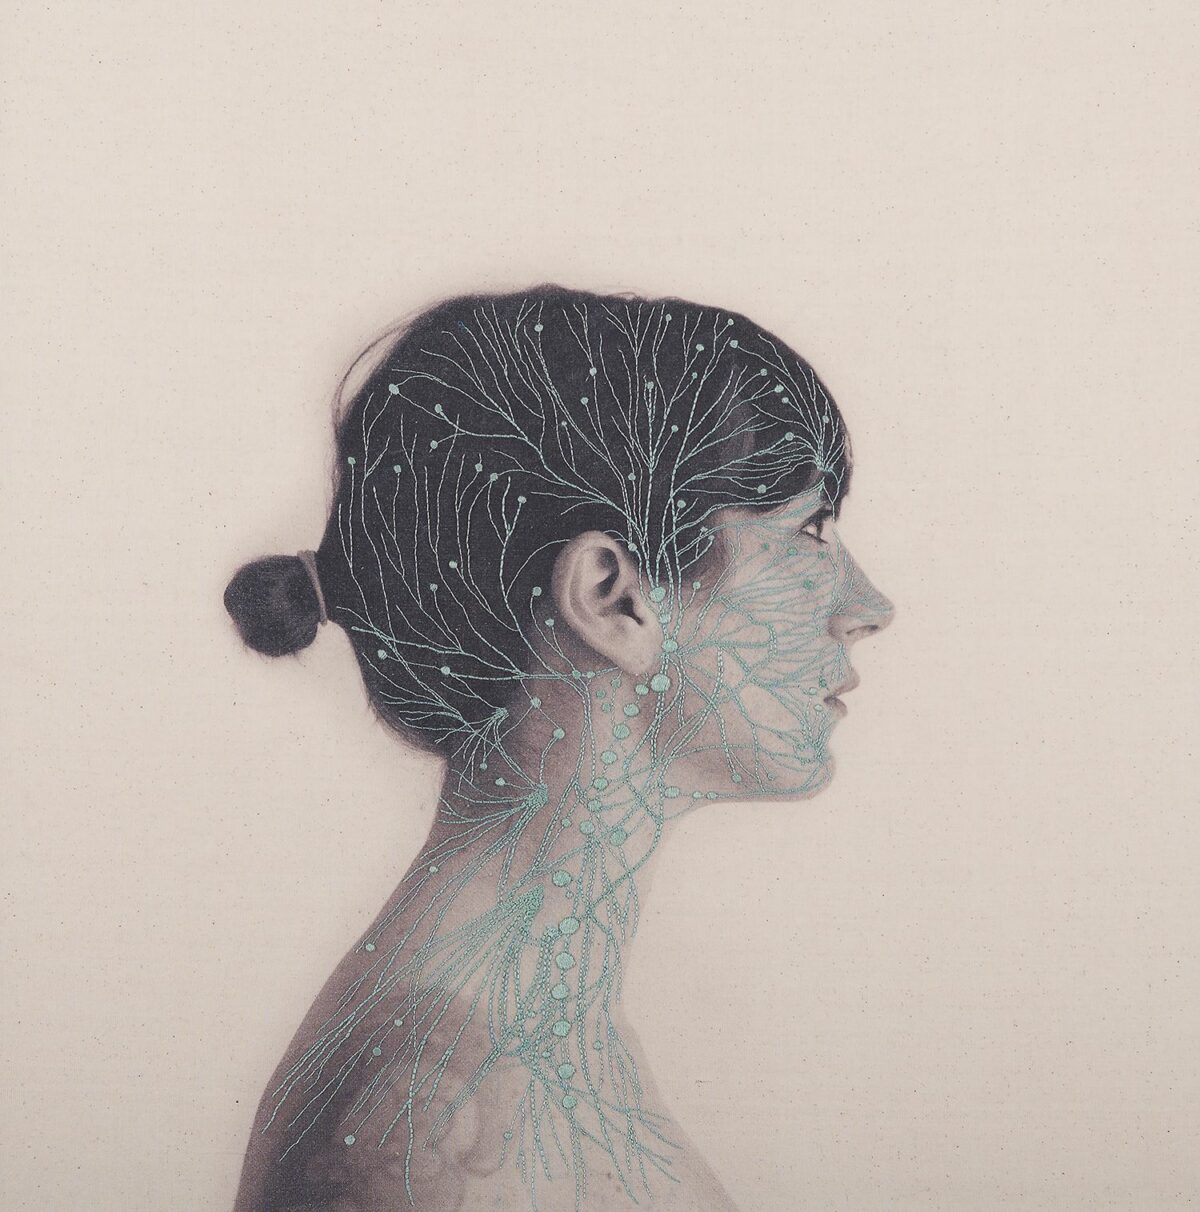 Constructal Self Portraits Embroidered With Anatomical Figures By Juana Gomez 5